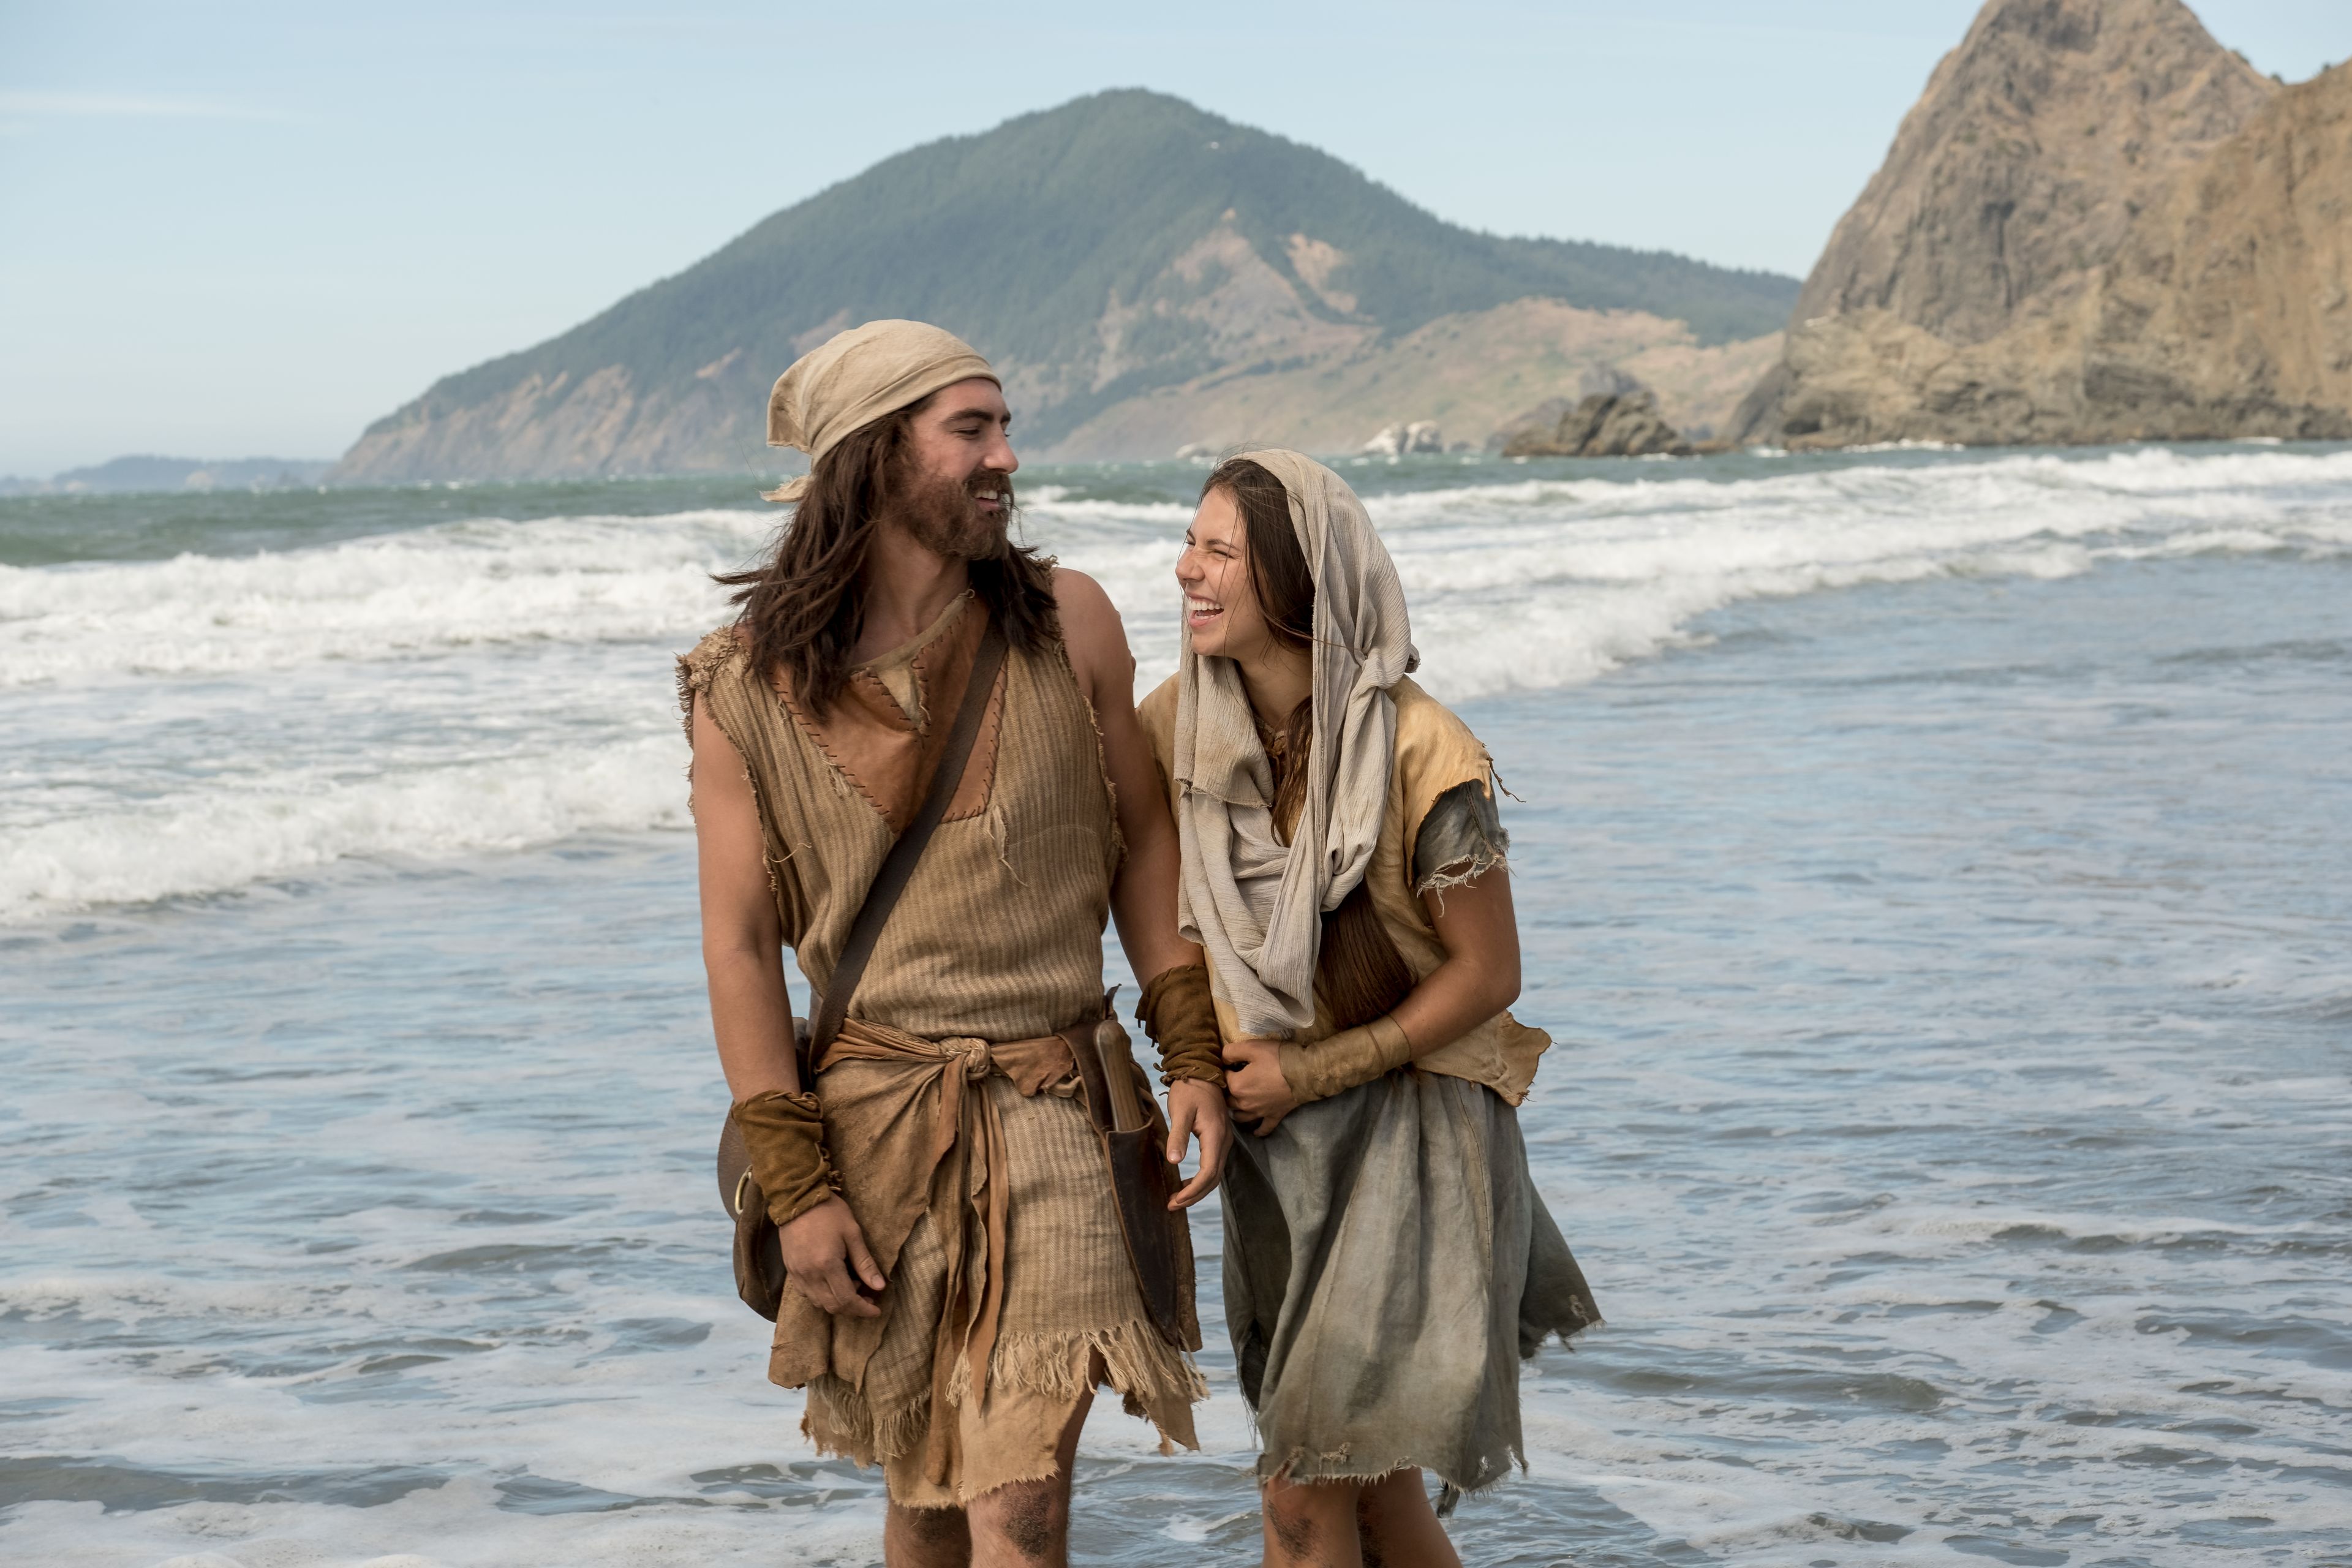 Nephi and his wife walk along the shore.